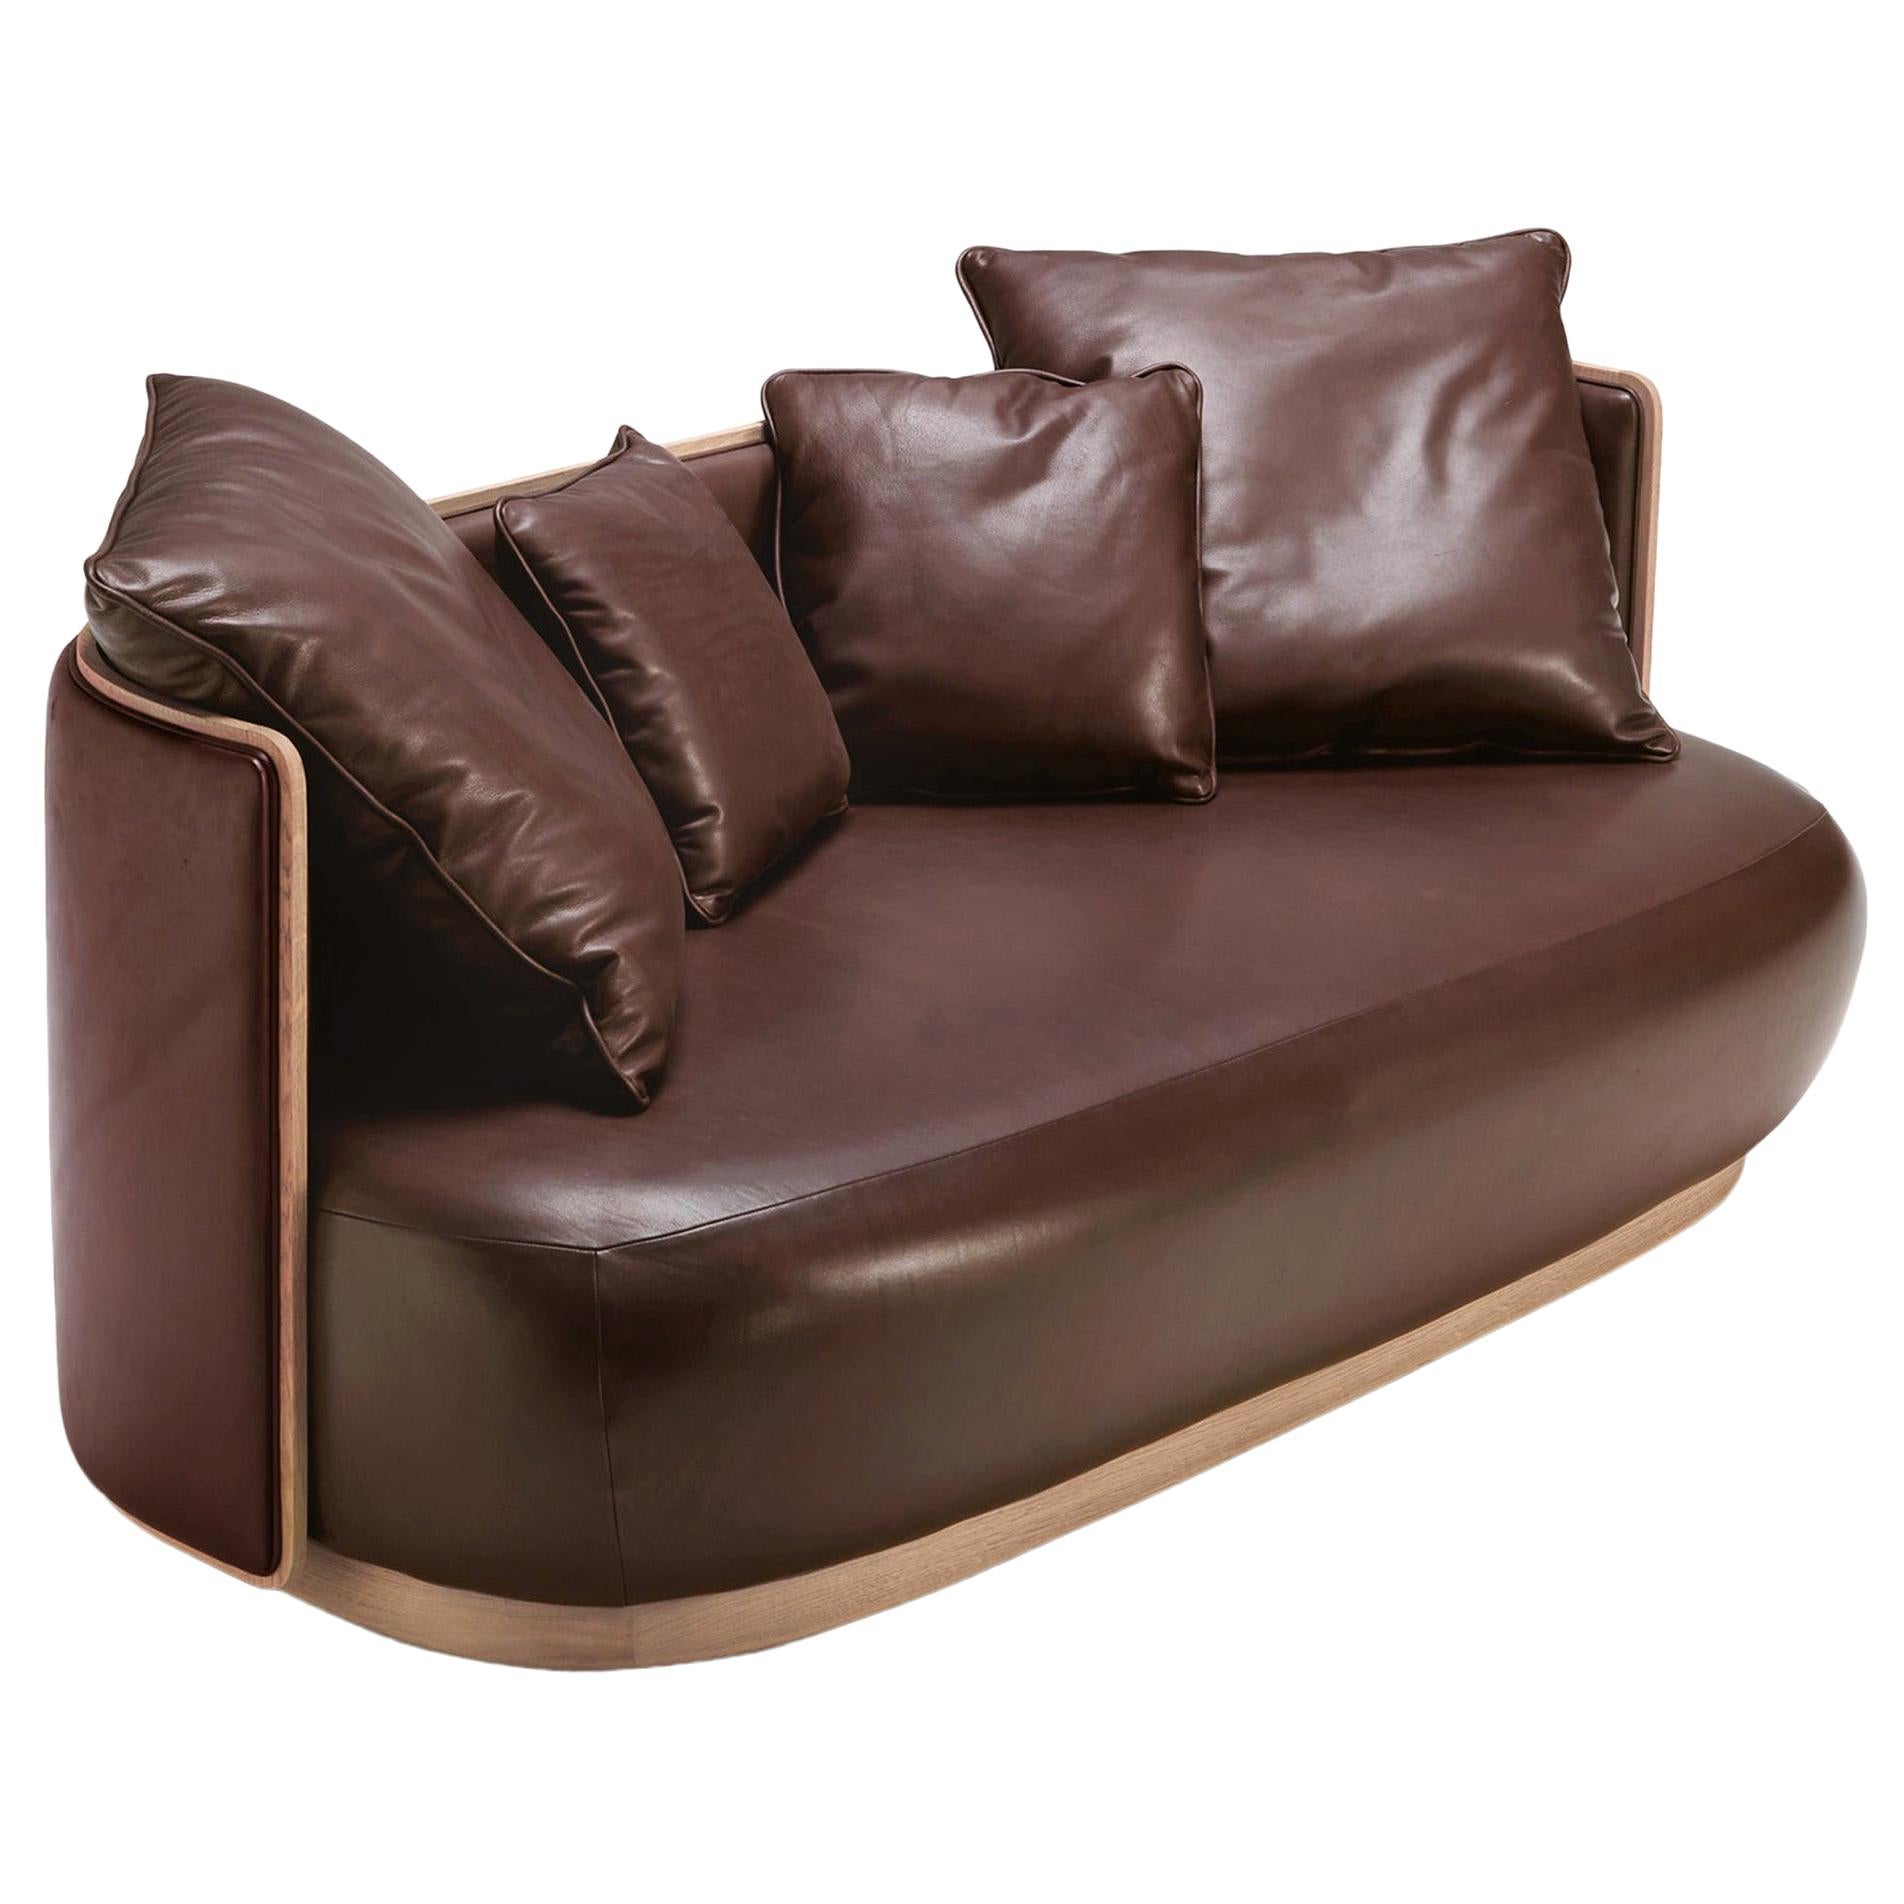 KIR ROYAL 2-Seater Curved Brown Sofa in Solid Wood and Covered with Leather